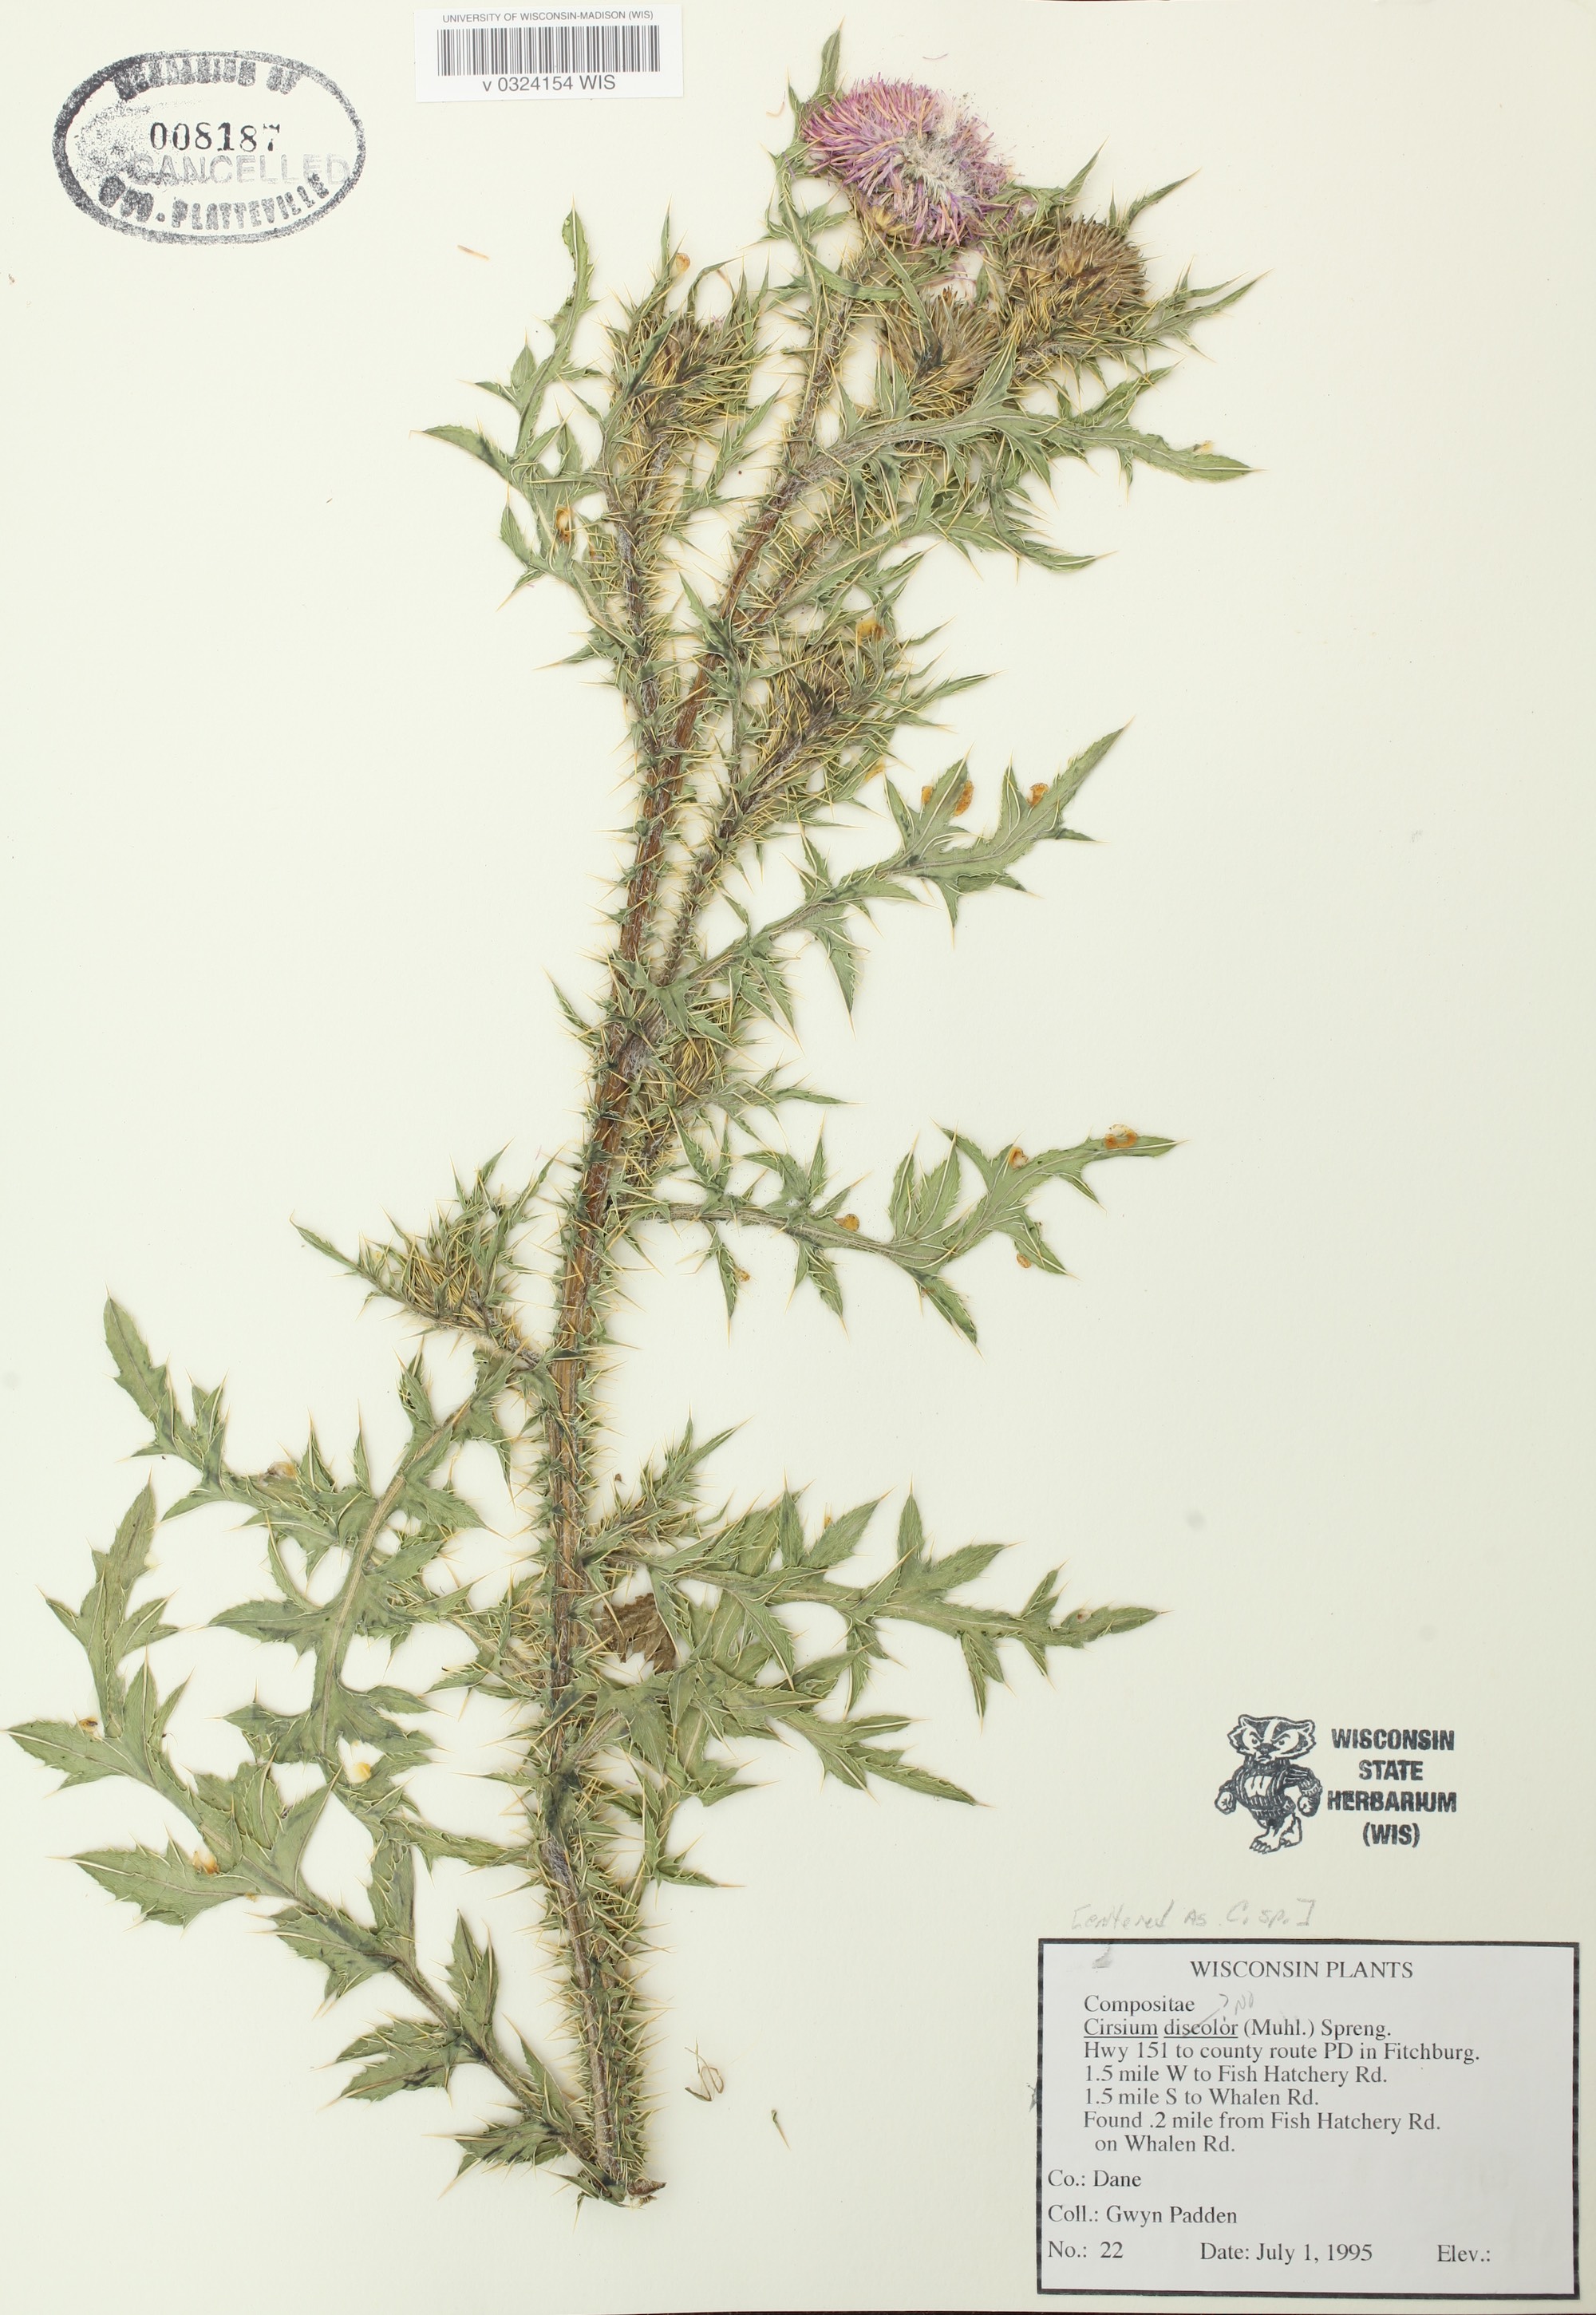  Plumeless Thistle specimen (wrongly labeled) collected in Dane County on Whalen Road near Fish Hatchery Road in Fitchburg, Wisconsin on July 1, 1995.